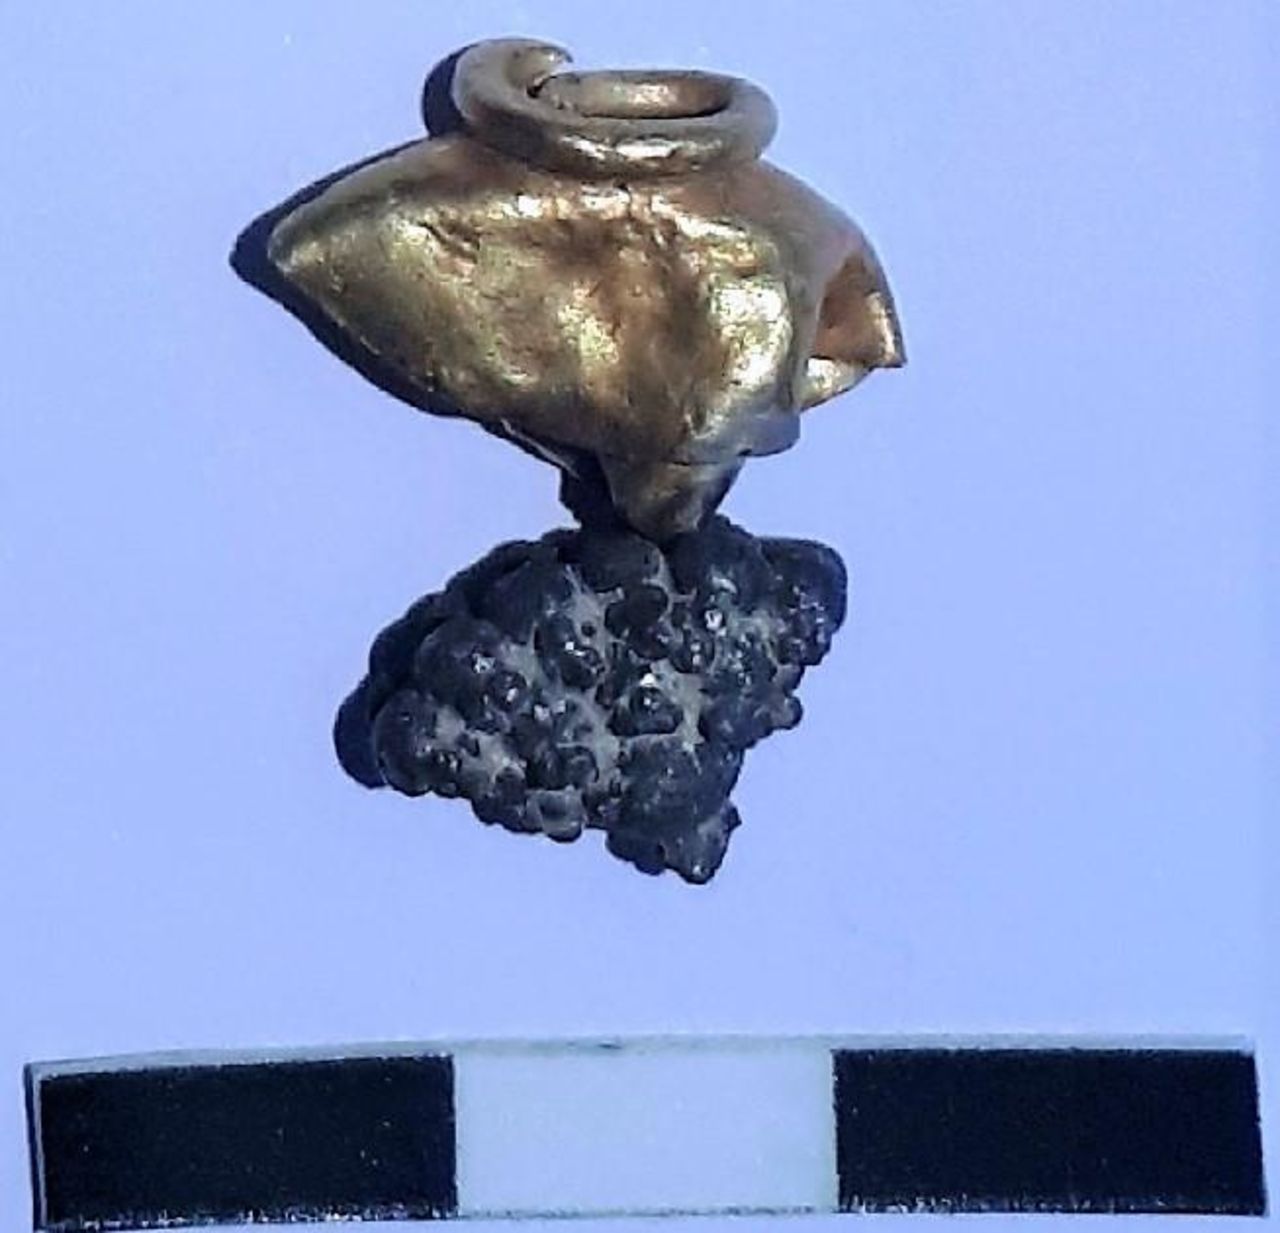 An earring or tassel ornament made from silver and gold, discovered at Mount Zion.